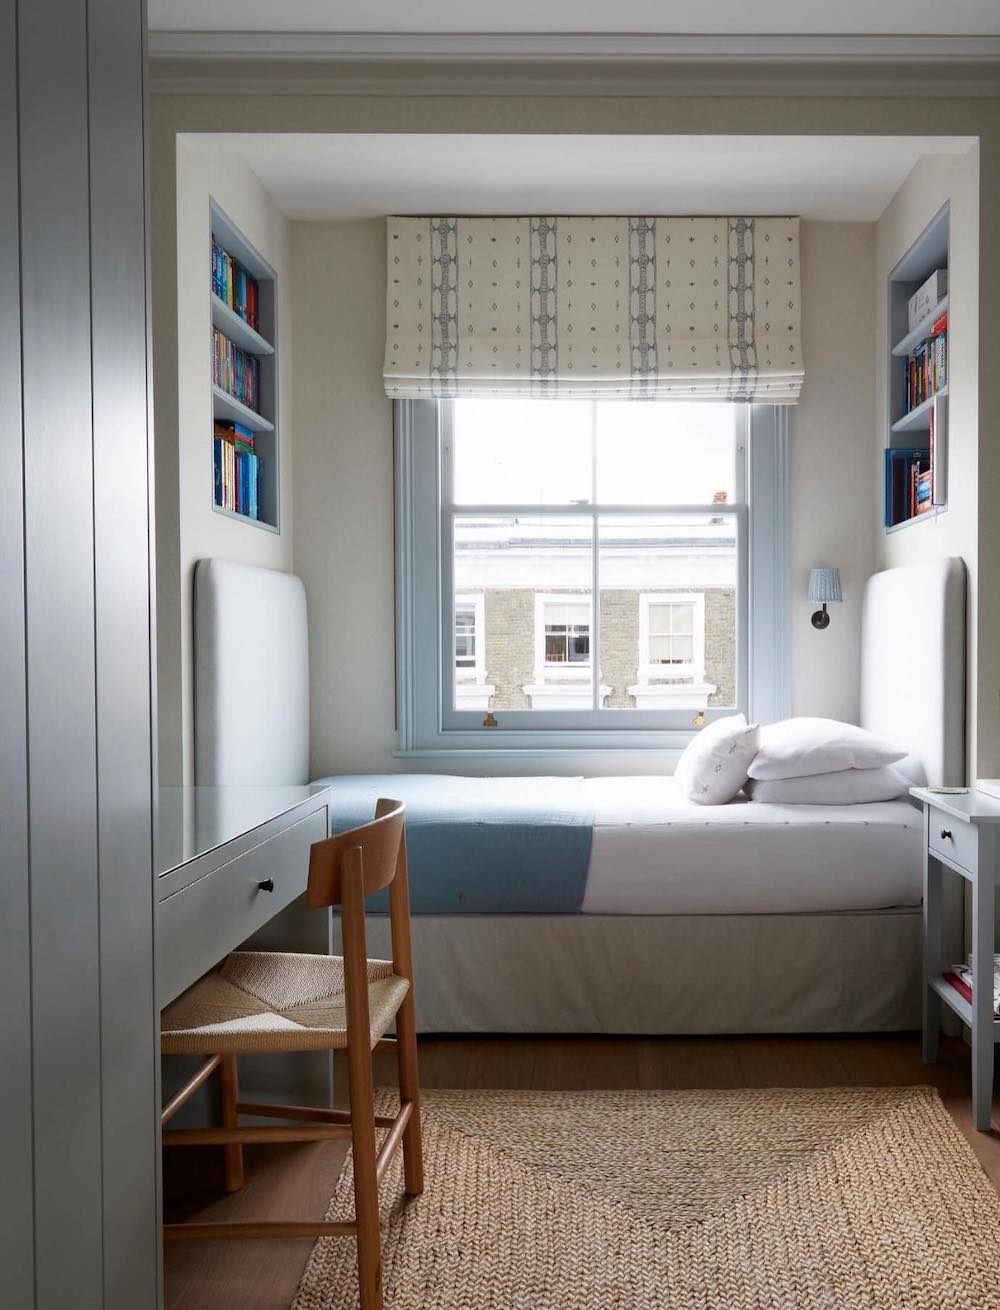 a white and baby blue bedding, bookshelves on either side of the bed, and a desk